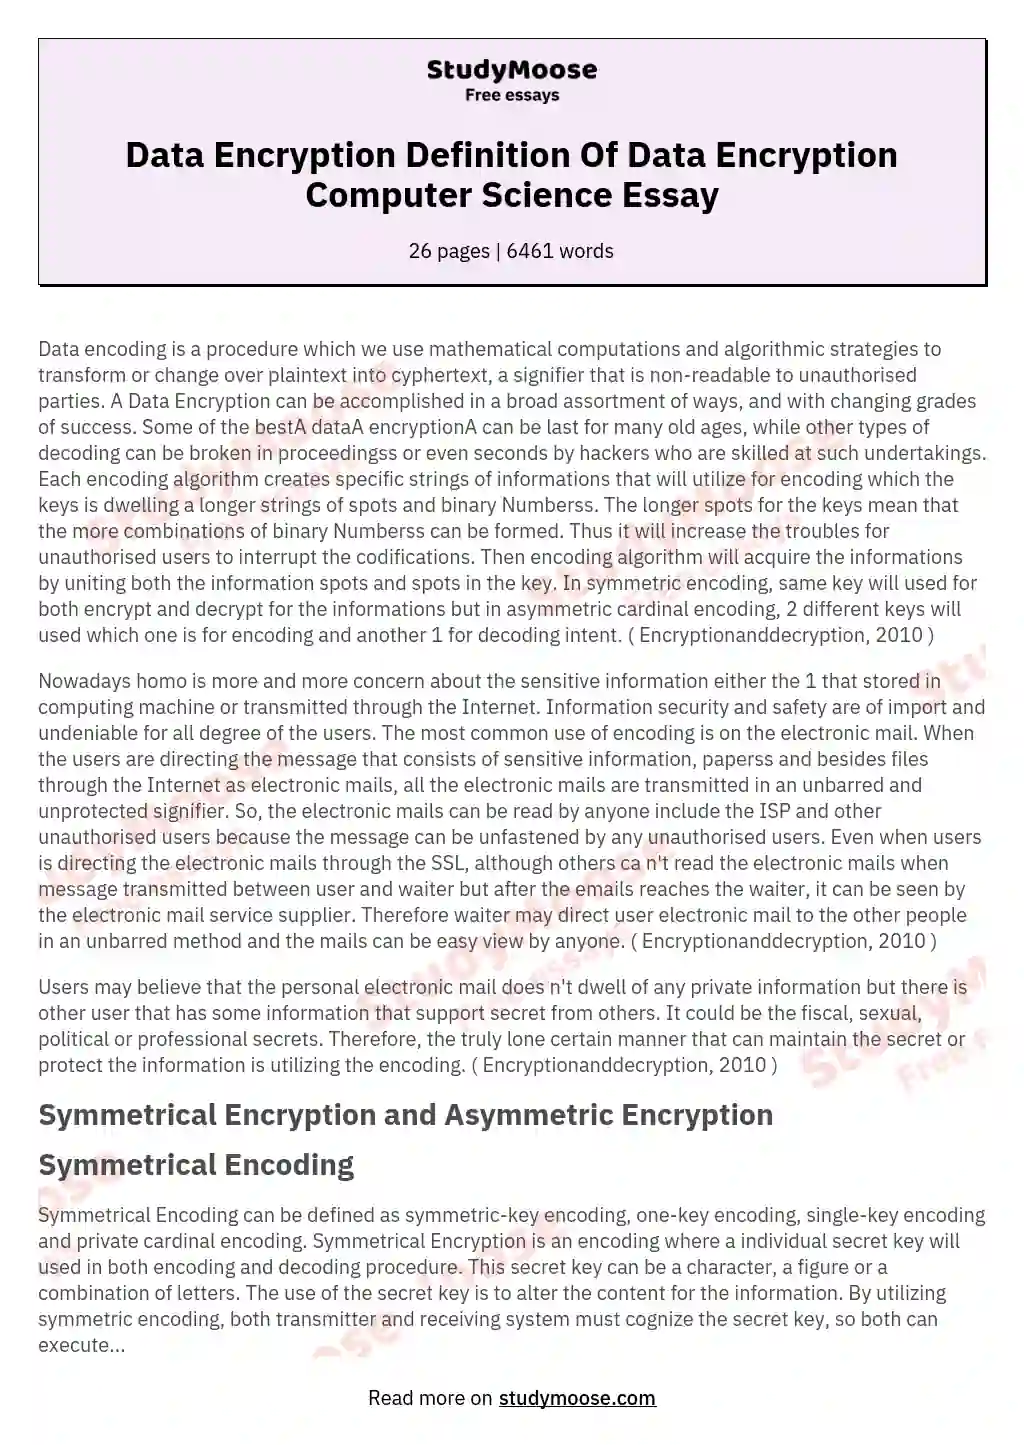 Data Encryption Definition Of Data Encryption Computer Science Essay